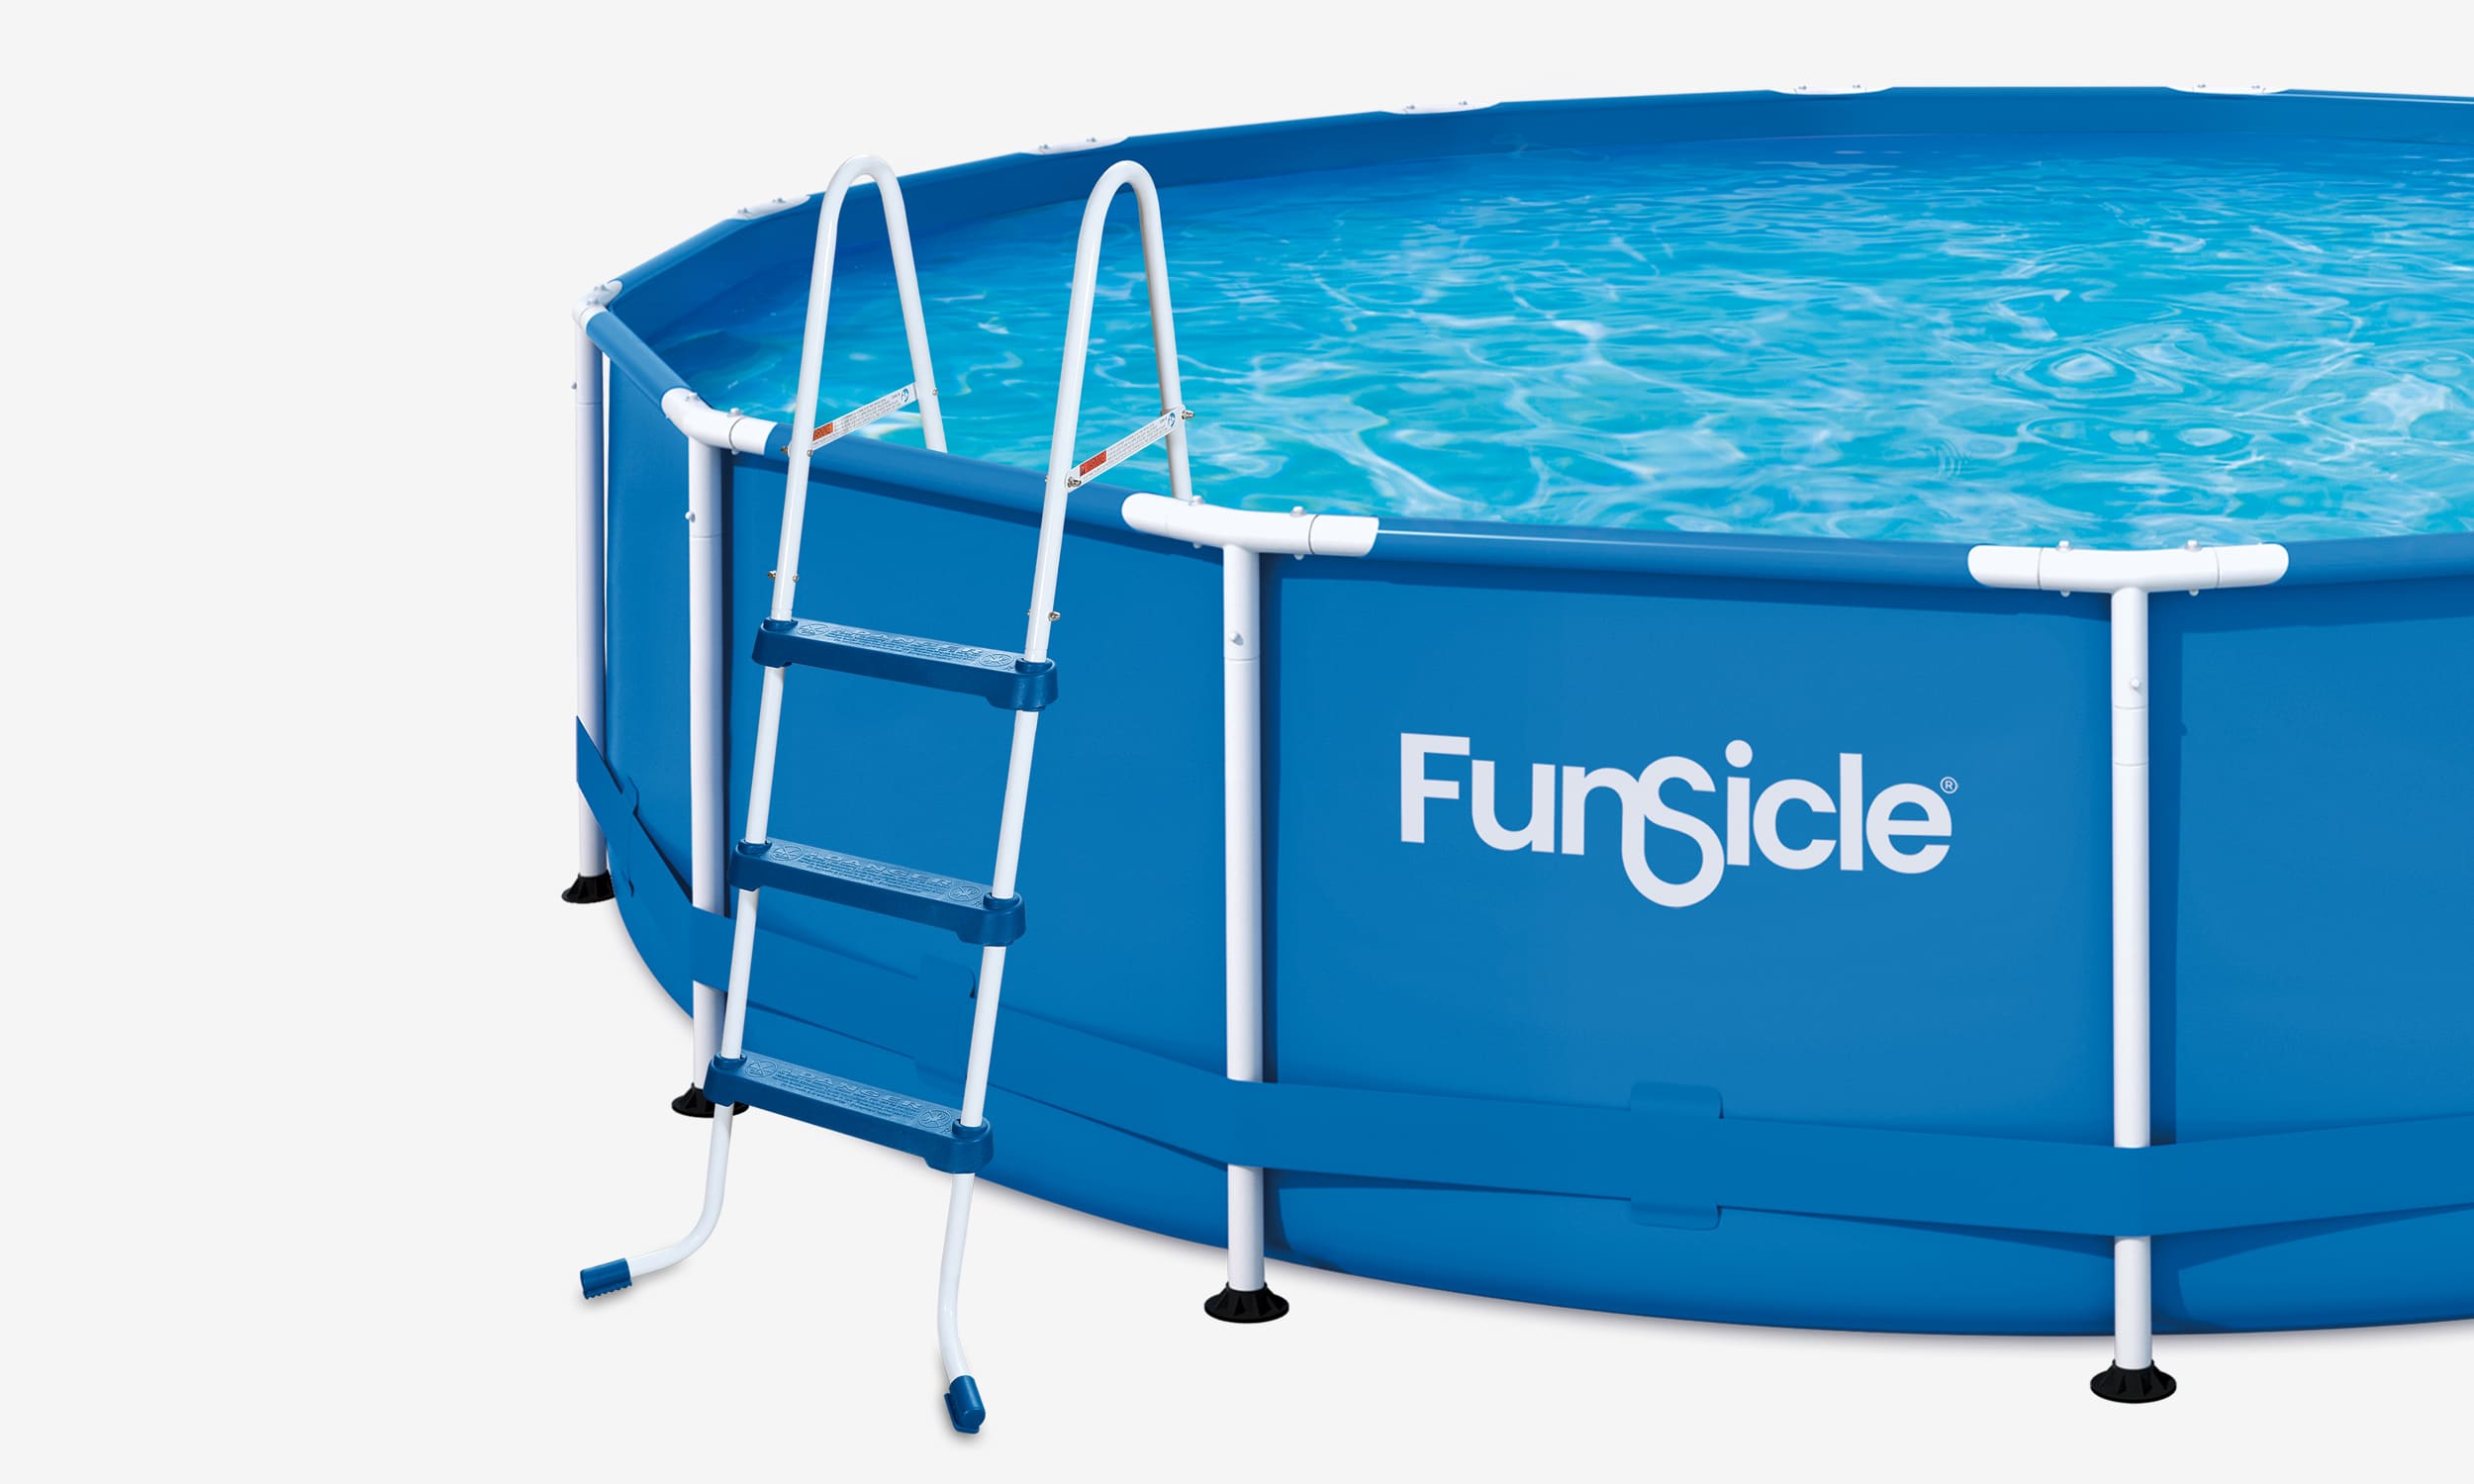  Funsicle 42" SureStep Ladder with a pool